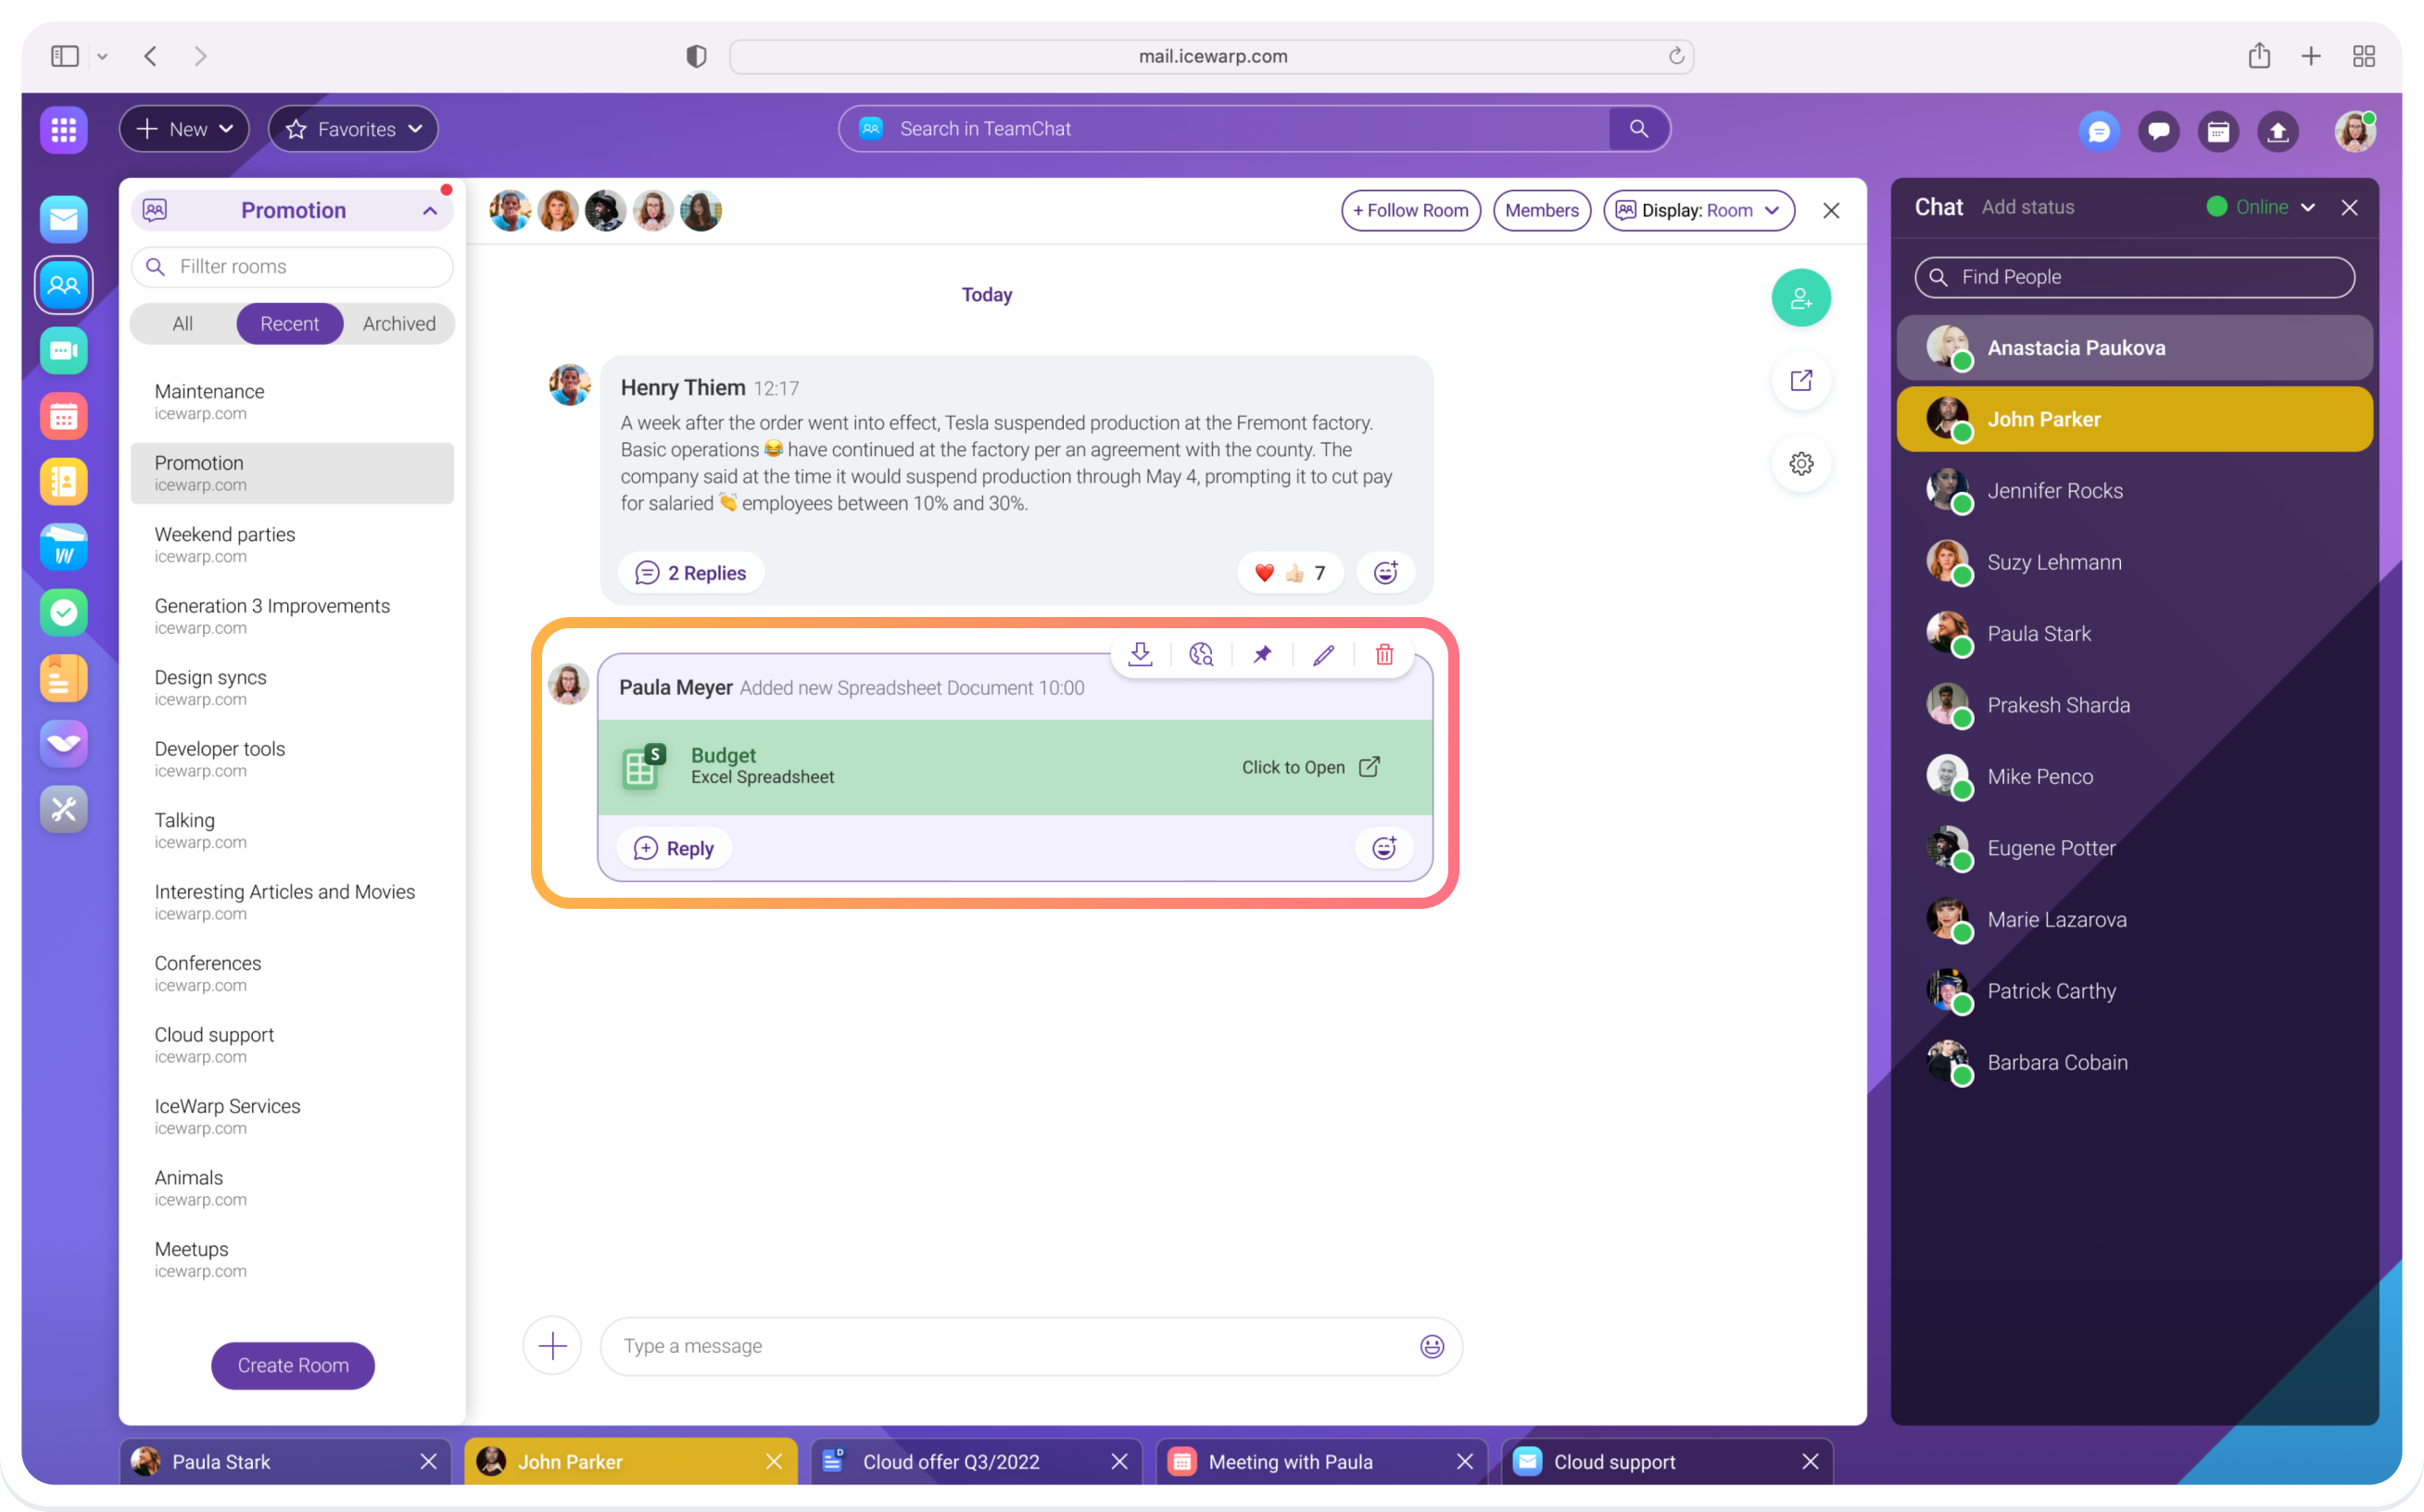 TeamChat brings clarity with threaded conversations